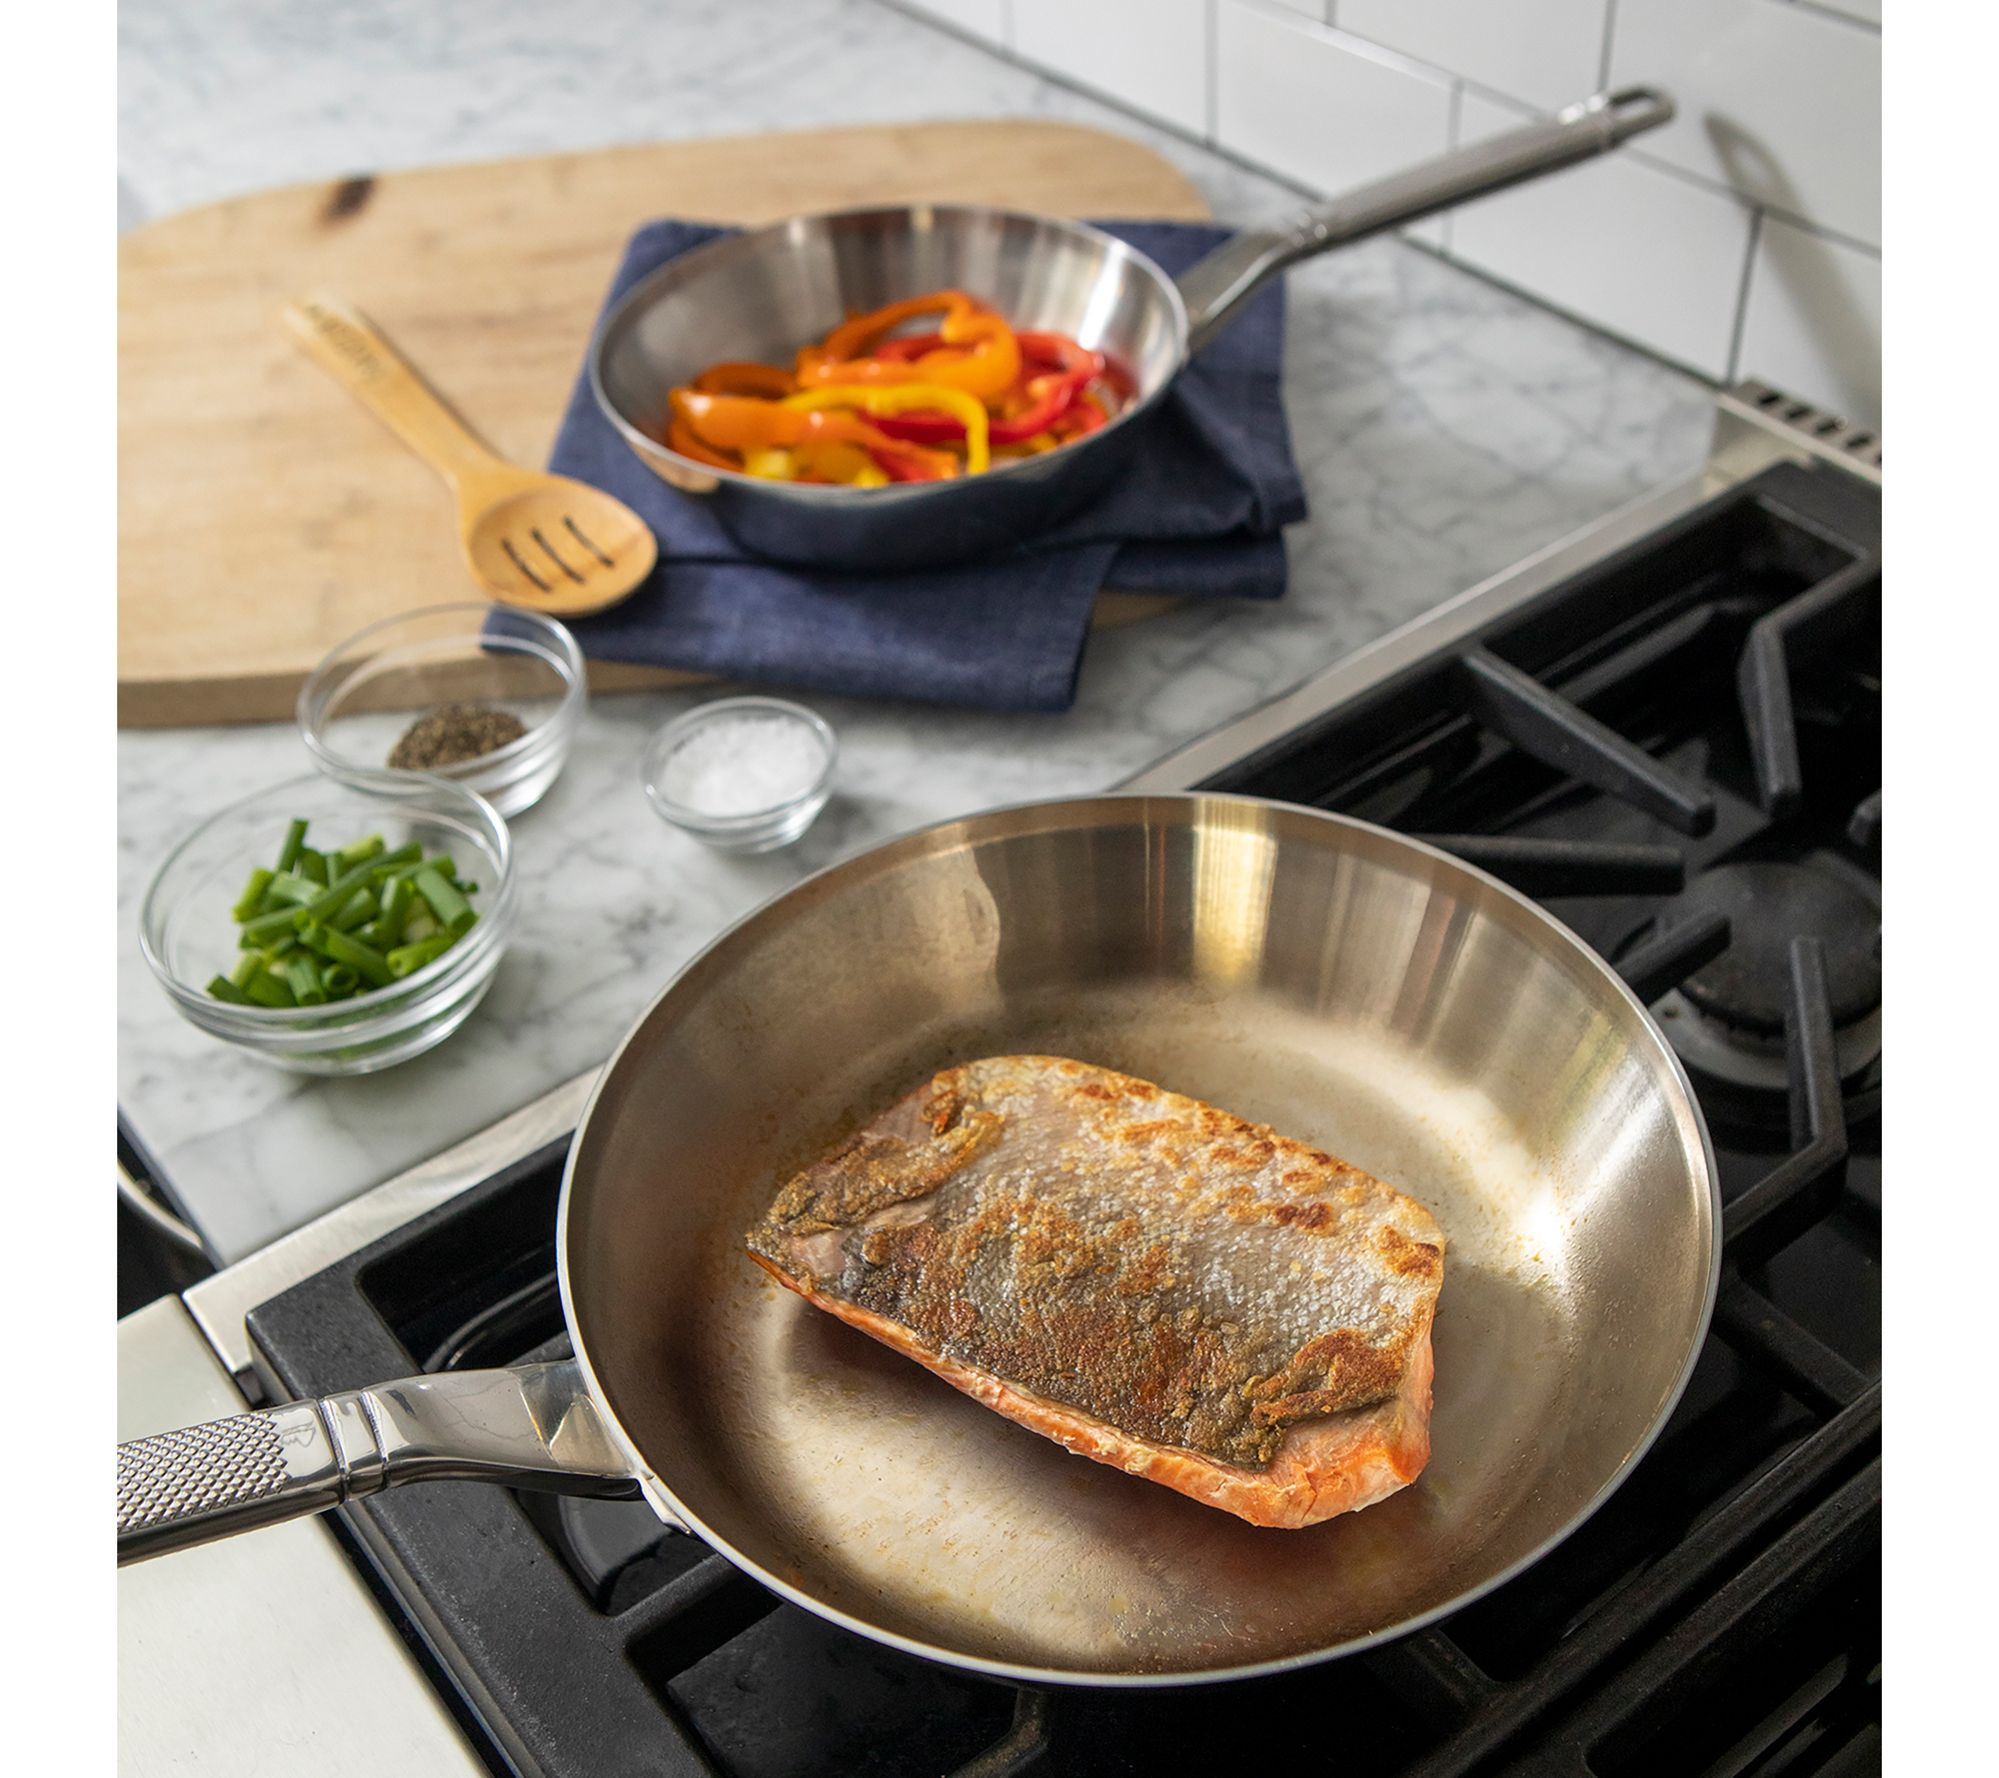 OXO Mira Tri-Ply Stainless Steel 12 Frying Pan Skillet